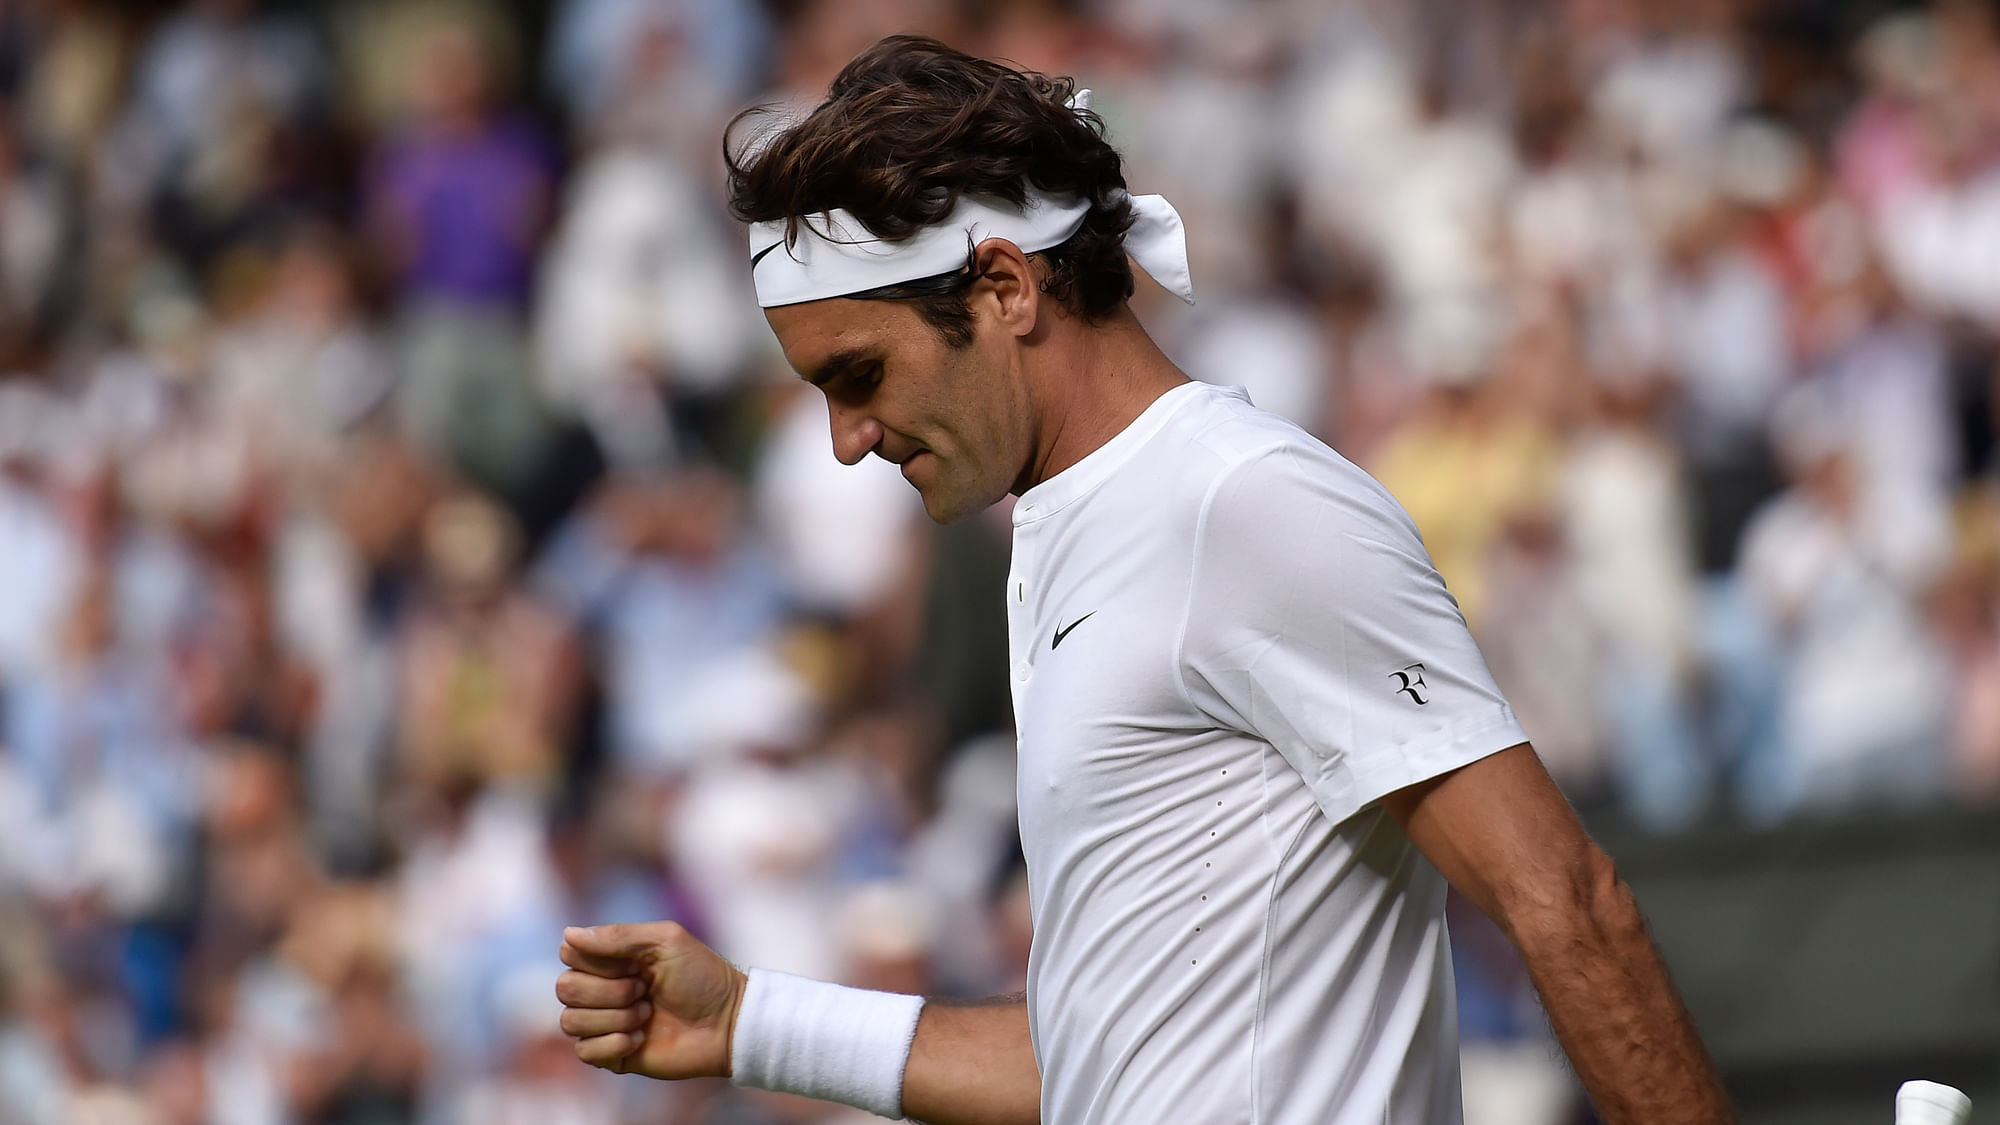 Roger Federer reacts after winning the semifinal against Andy Murray. (Photo: AP)